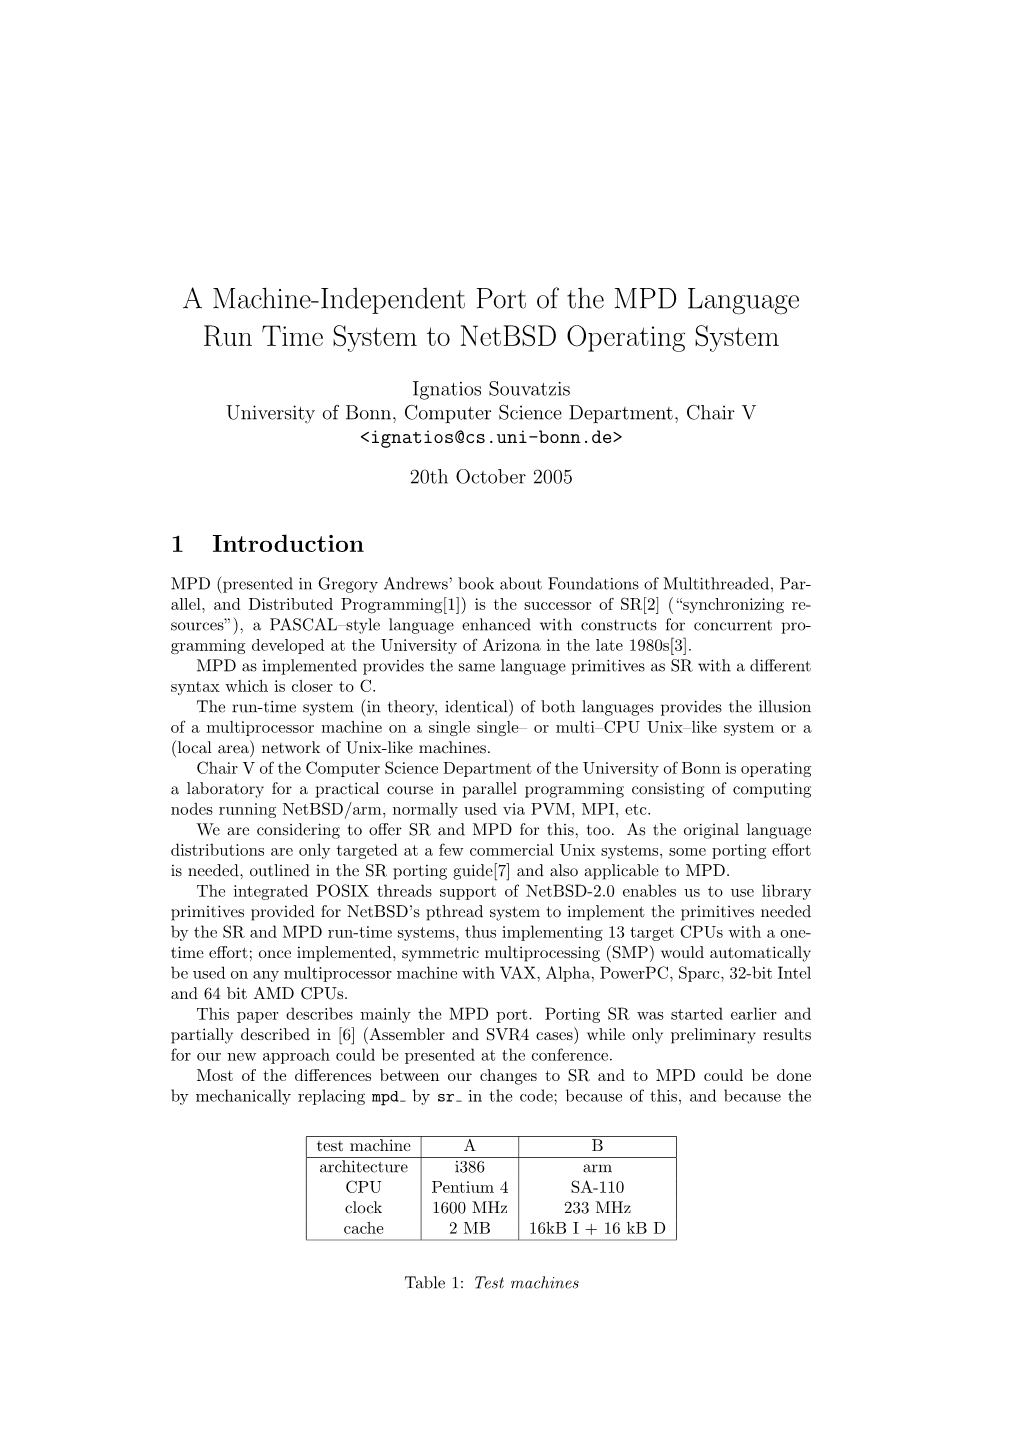 A Machine-Independent Port of the MPD Language Run Time System to Netbsd Operating System